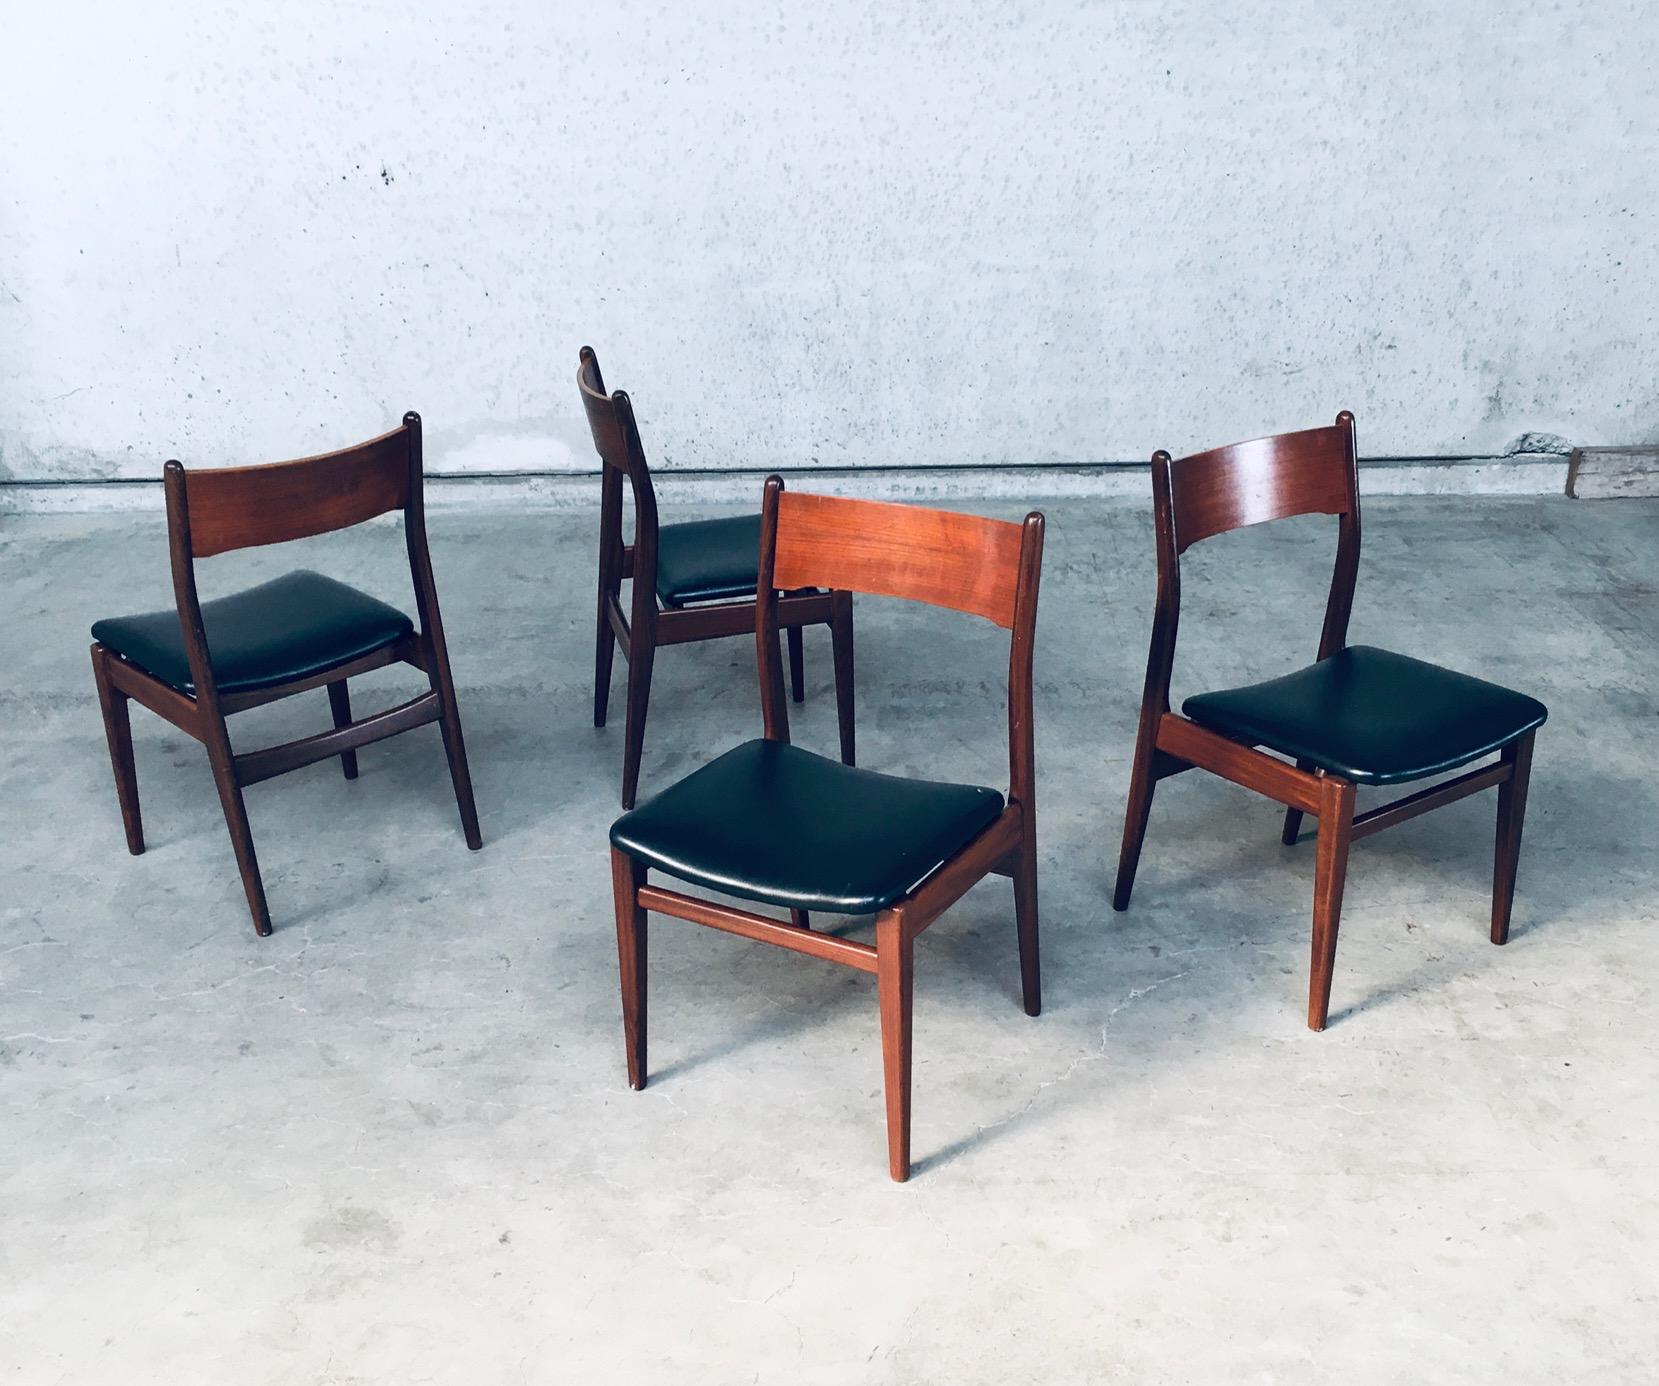 Vintage Mid-Century Modern Scandinavian Design Teak dining chair set of 4. Made in Denmark in the 1960's. Teak wooden frame with bend plywood back rest & black leatherlook faux leather covered seat. Well constructed chairs in very good condition.